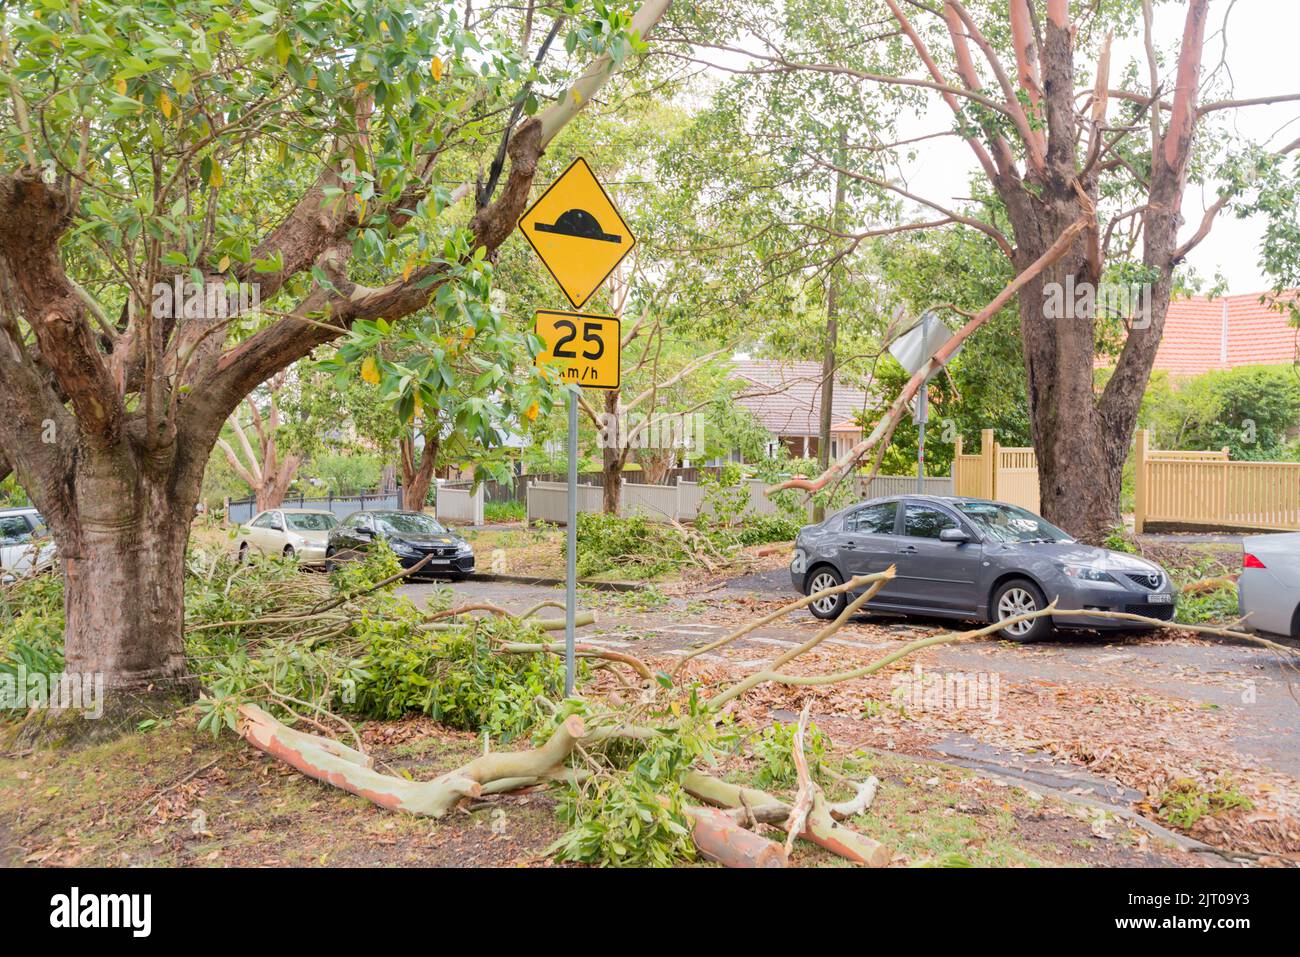 Sydney Aust Nov 26th 2019: A sudden storm ripped through suburbs in northern Sydney snapping trees and power poles leaving carnage but no loss of life Stock Photo